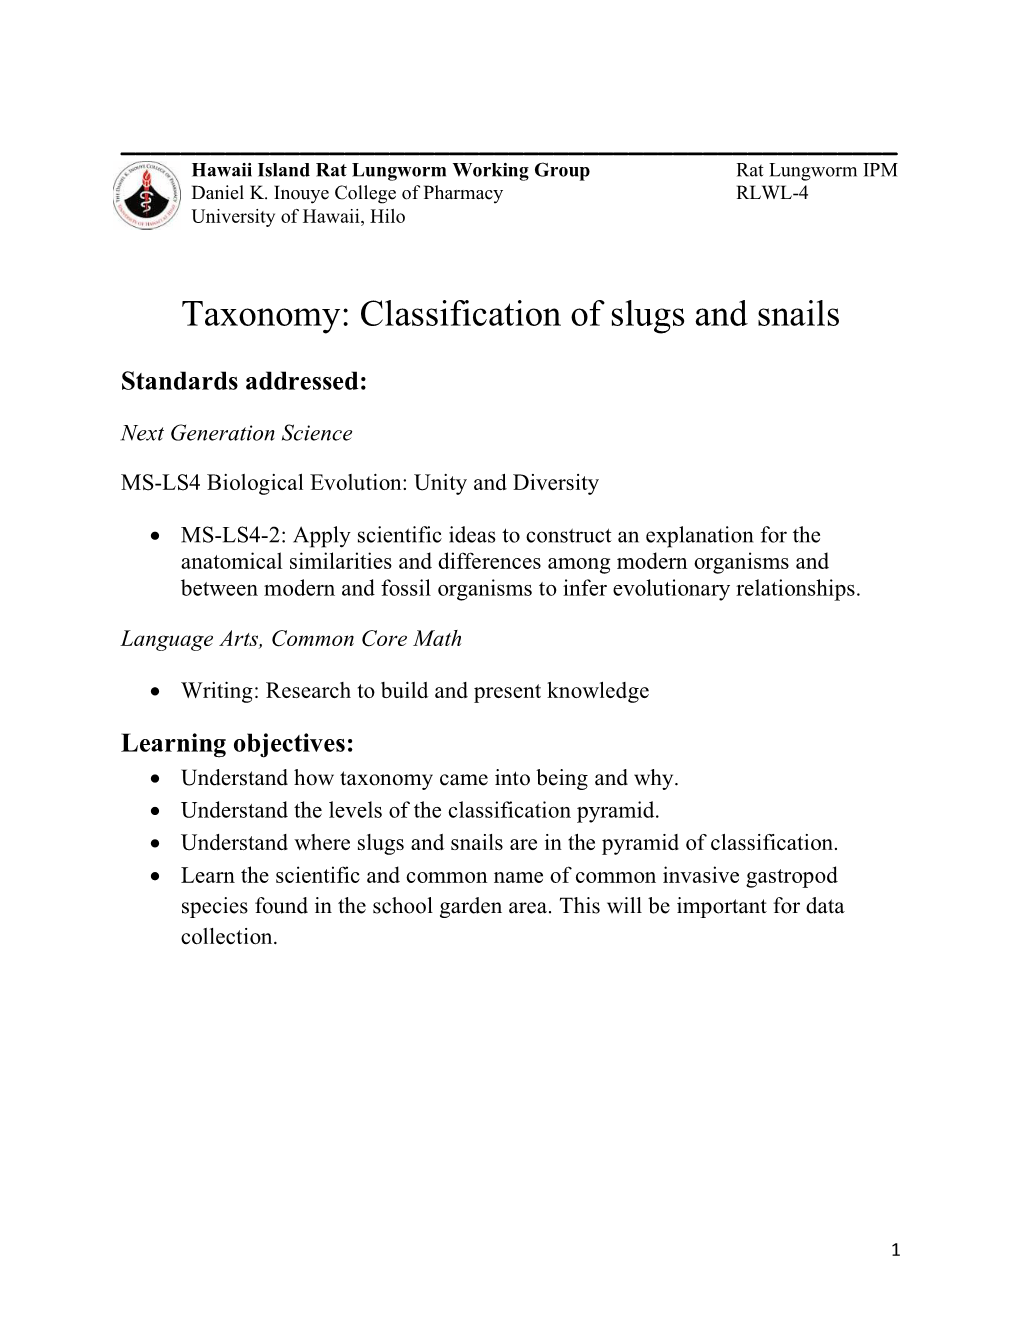 Taxonomy: Classification of Slugs and Snails